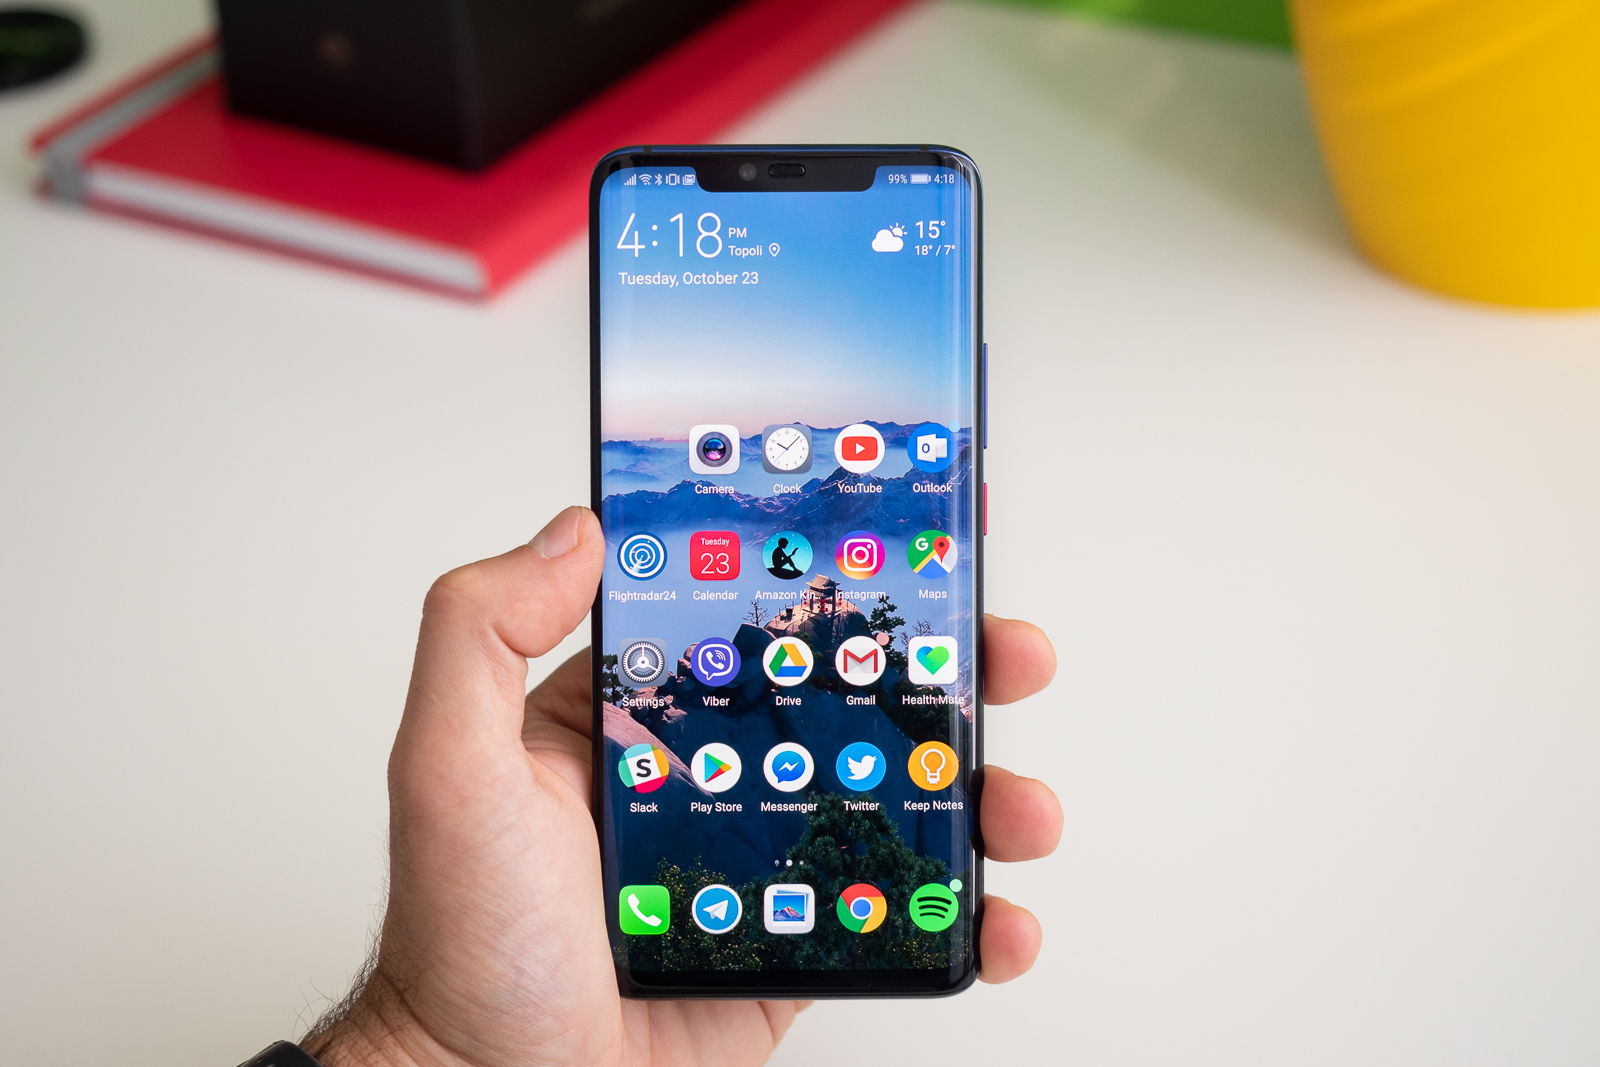 Huawei already has 80 million devices running Android 9 Pie